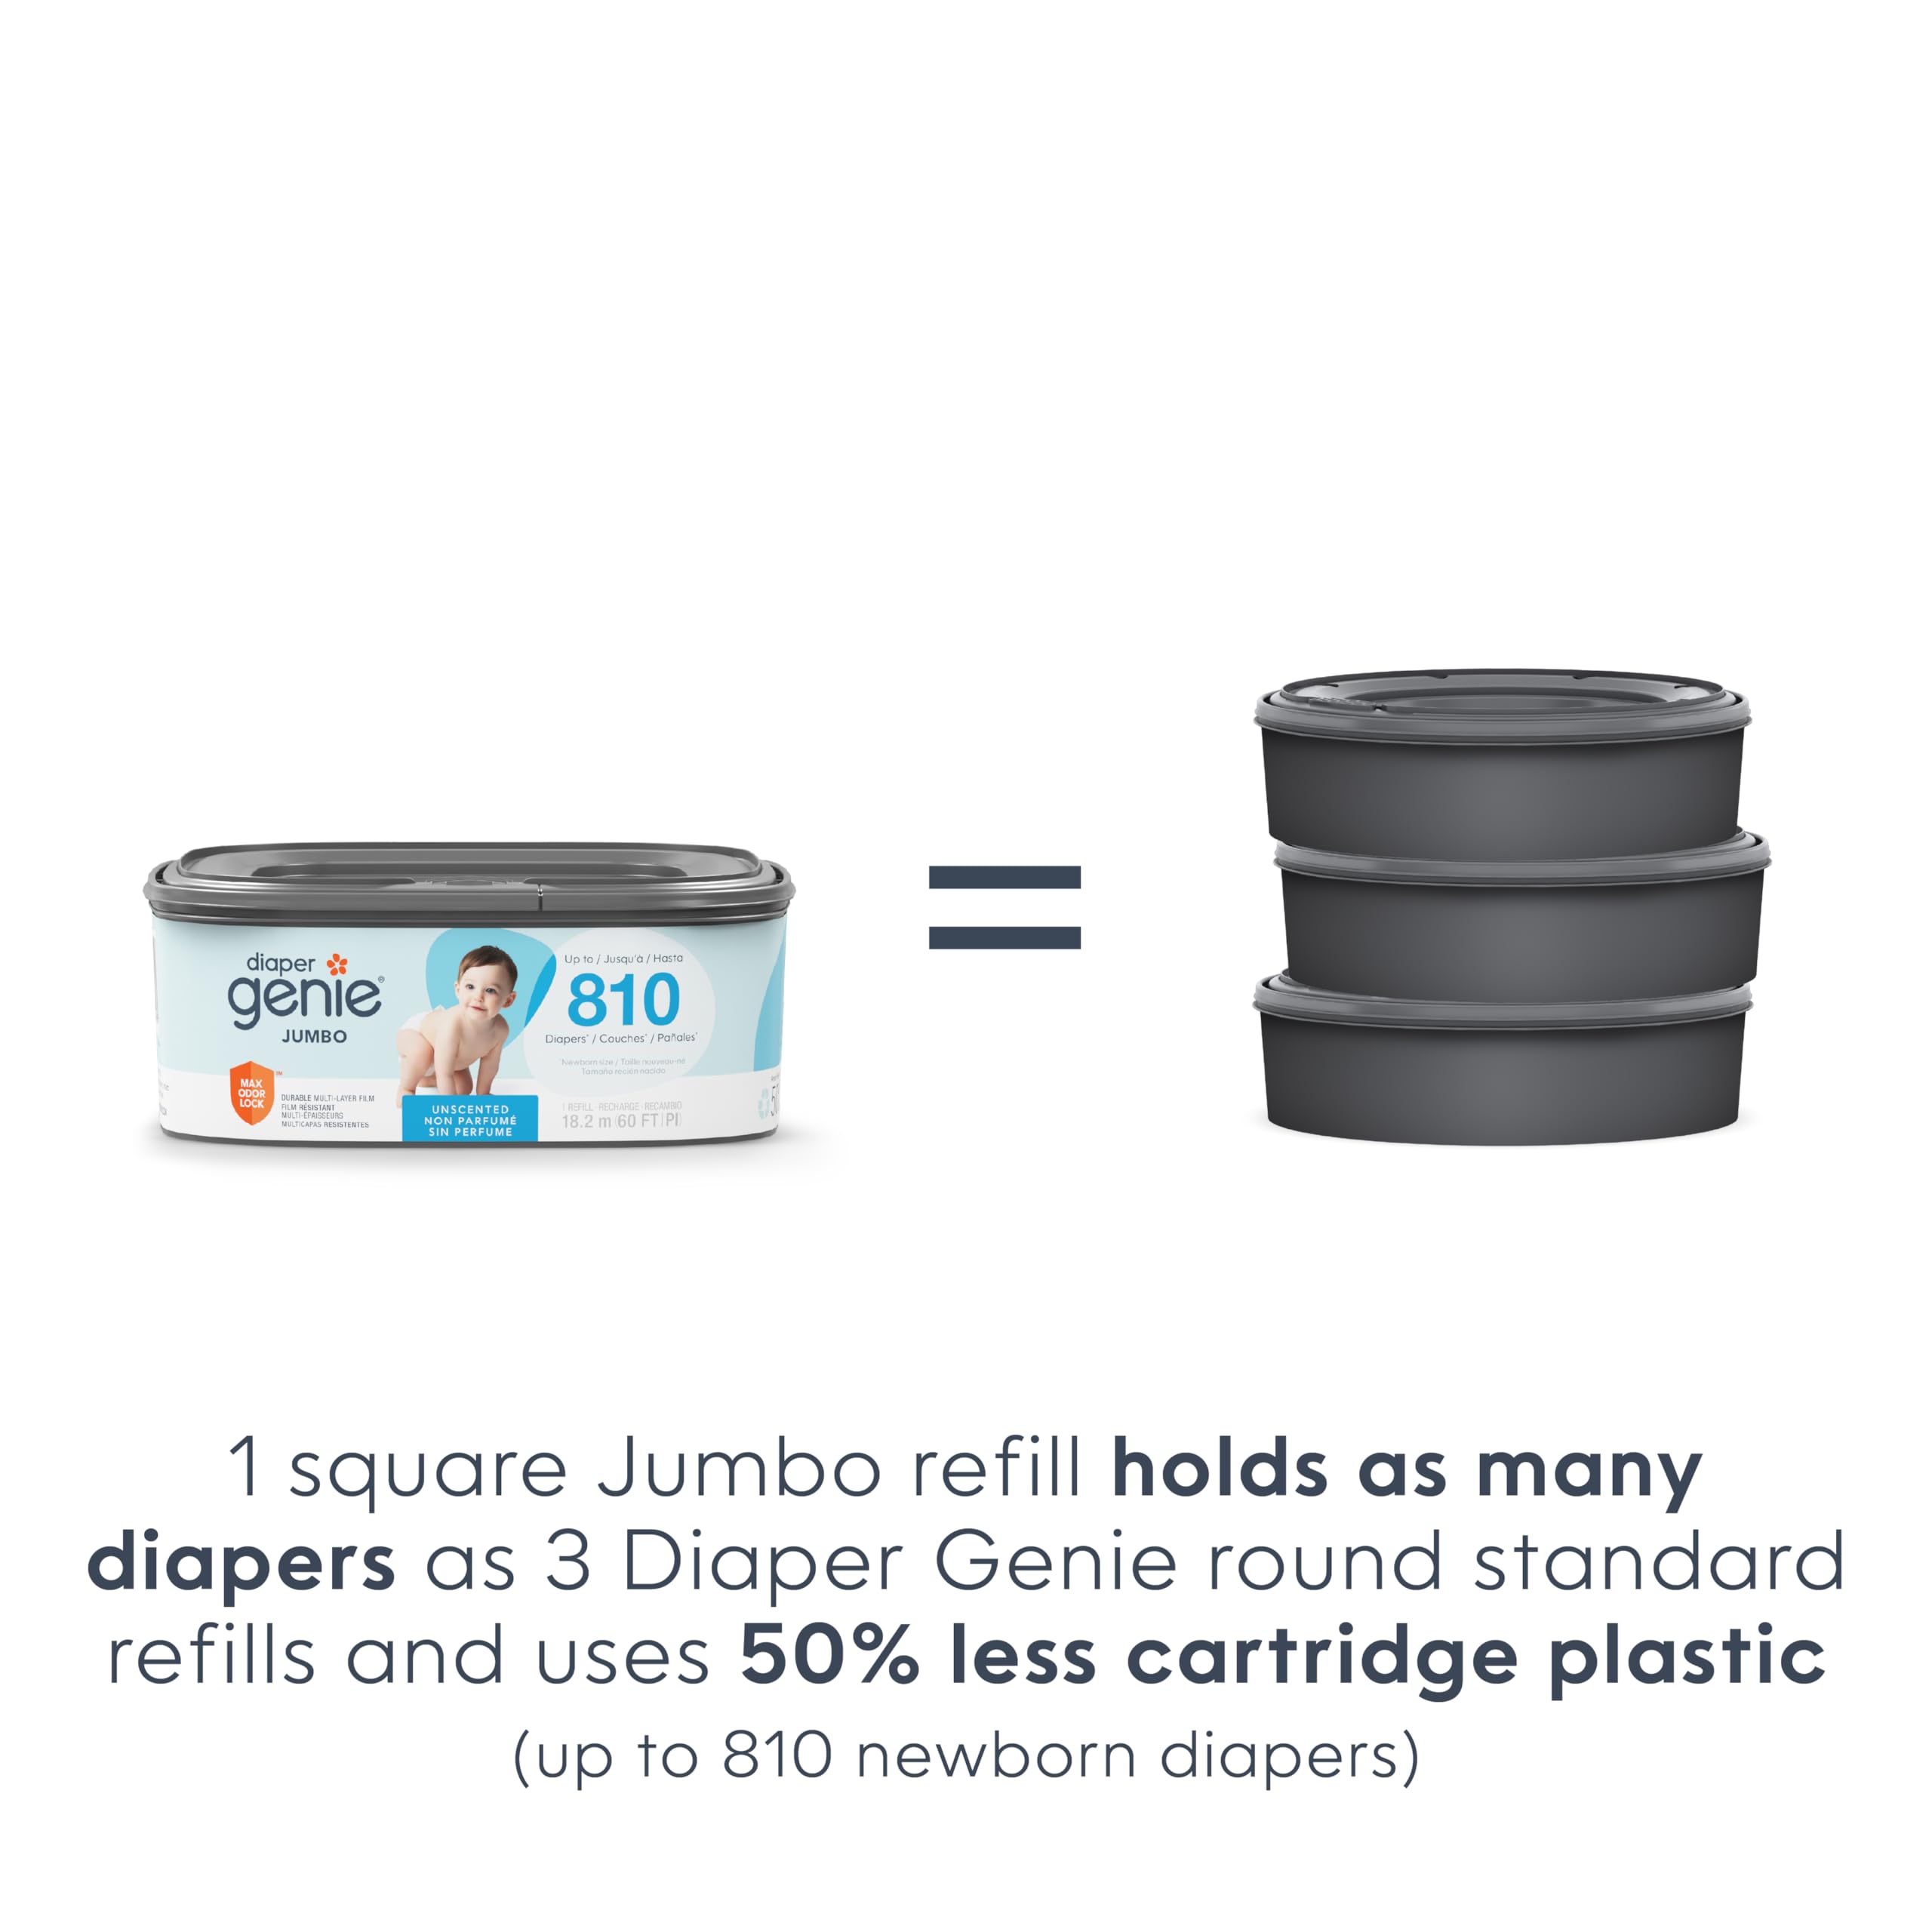 The Diaper Genie Jumbo Square Refill, with Continuous Film, can Hold up to 810 Newborn-Sized Diapers per Refill.